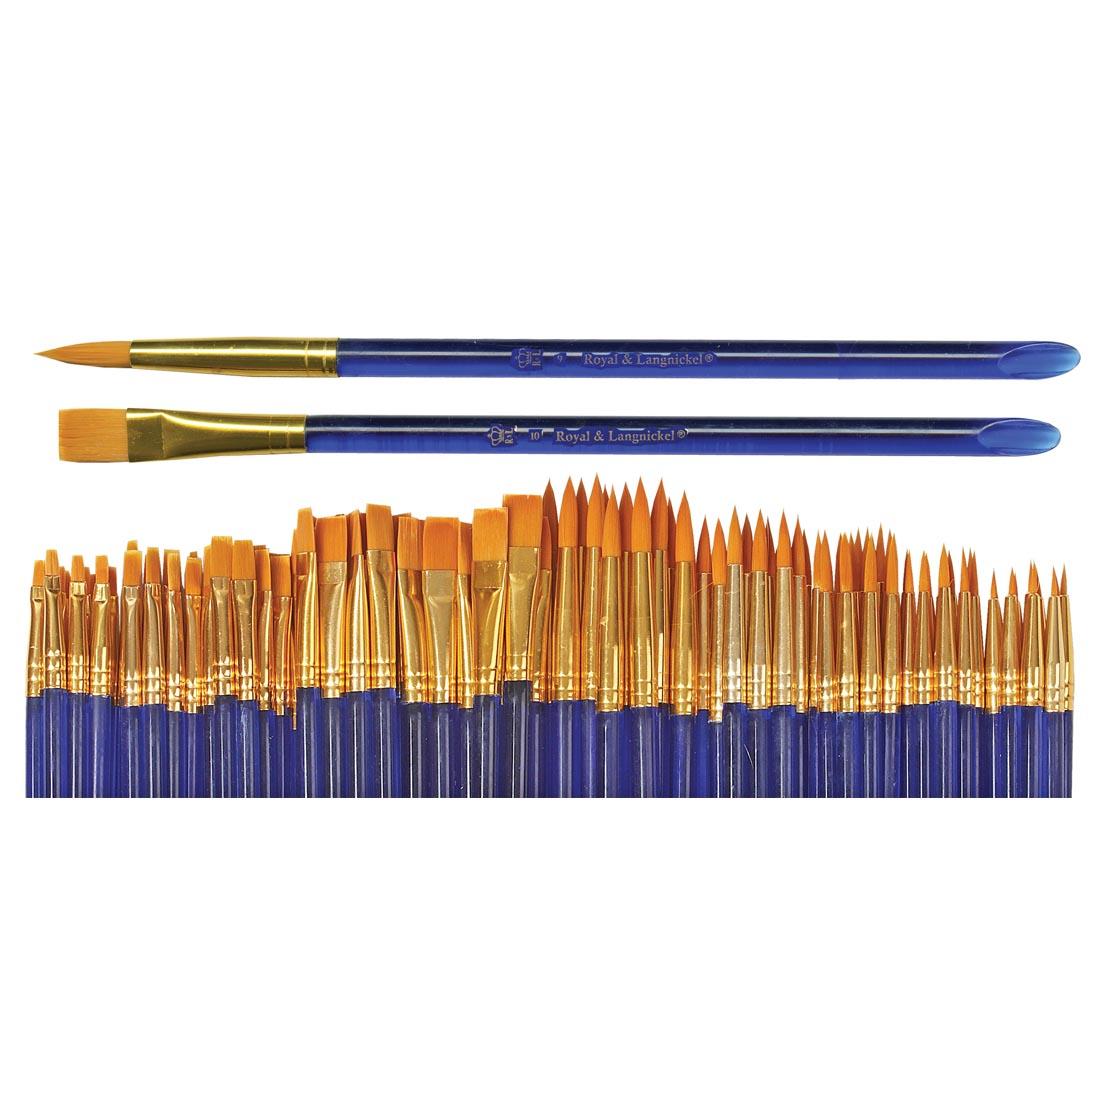 Royal & Langnickel Economy Gold Taklon Brush Assortment with examples of a round and a shader brush above it